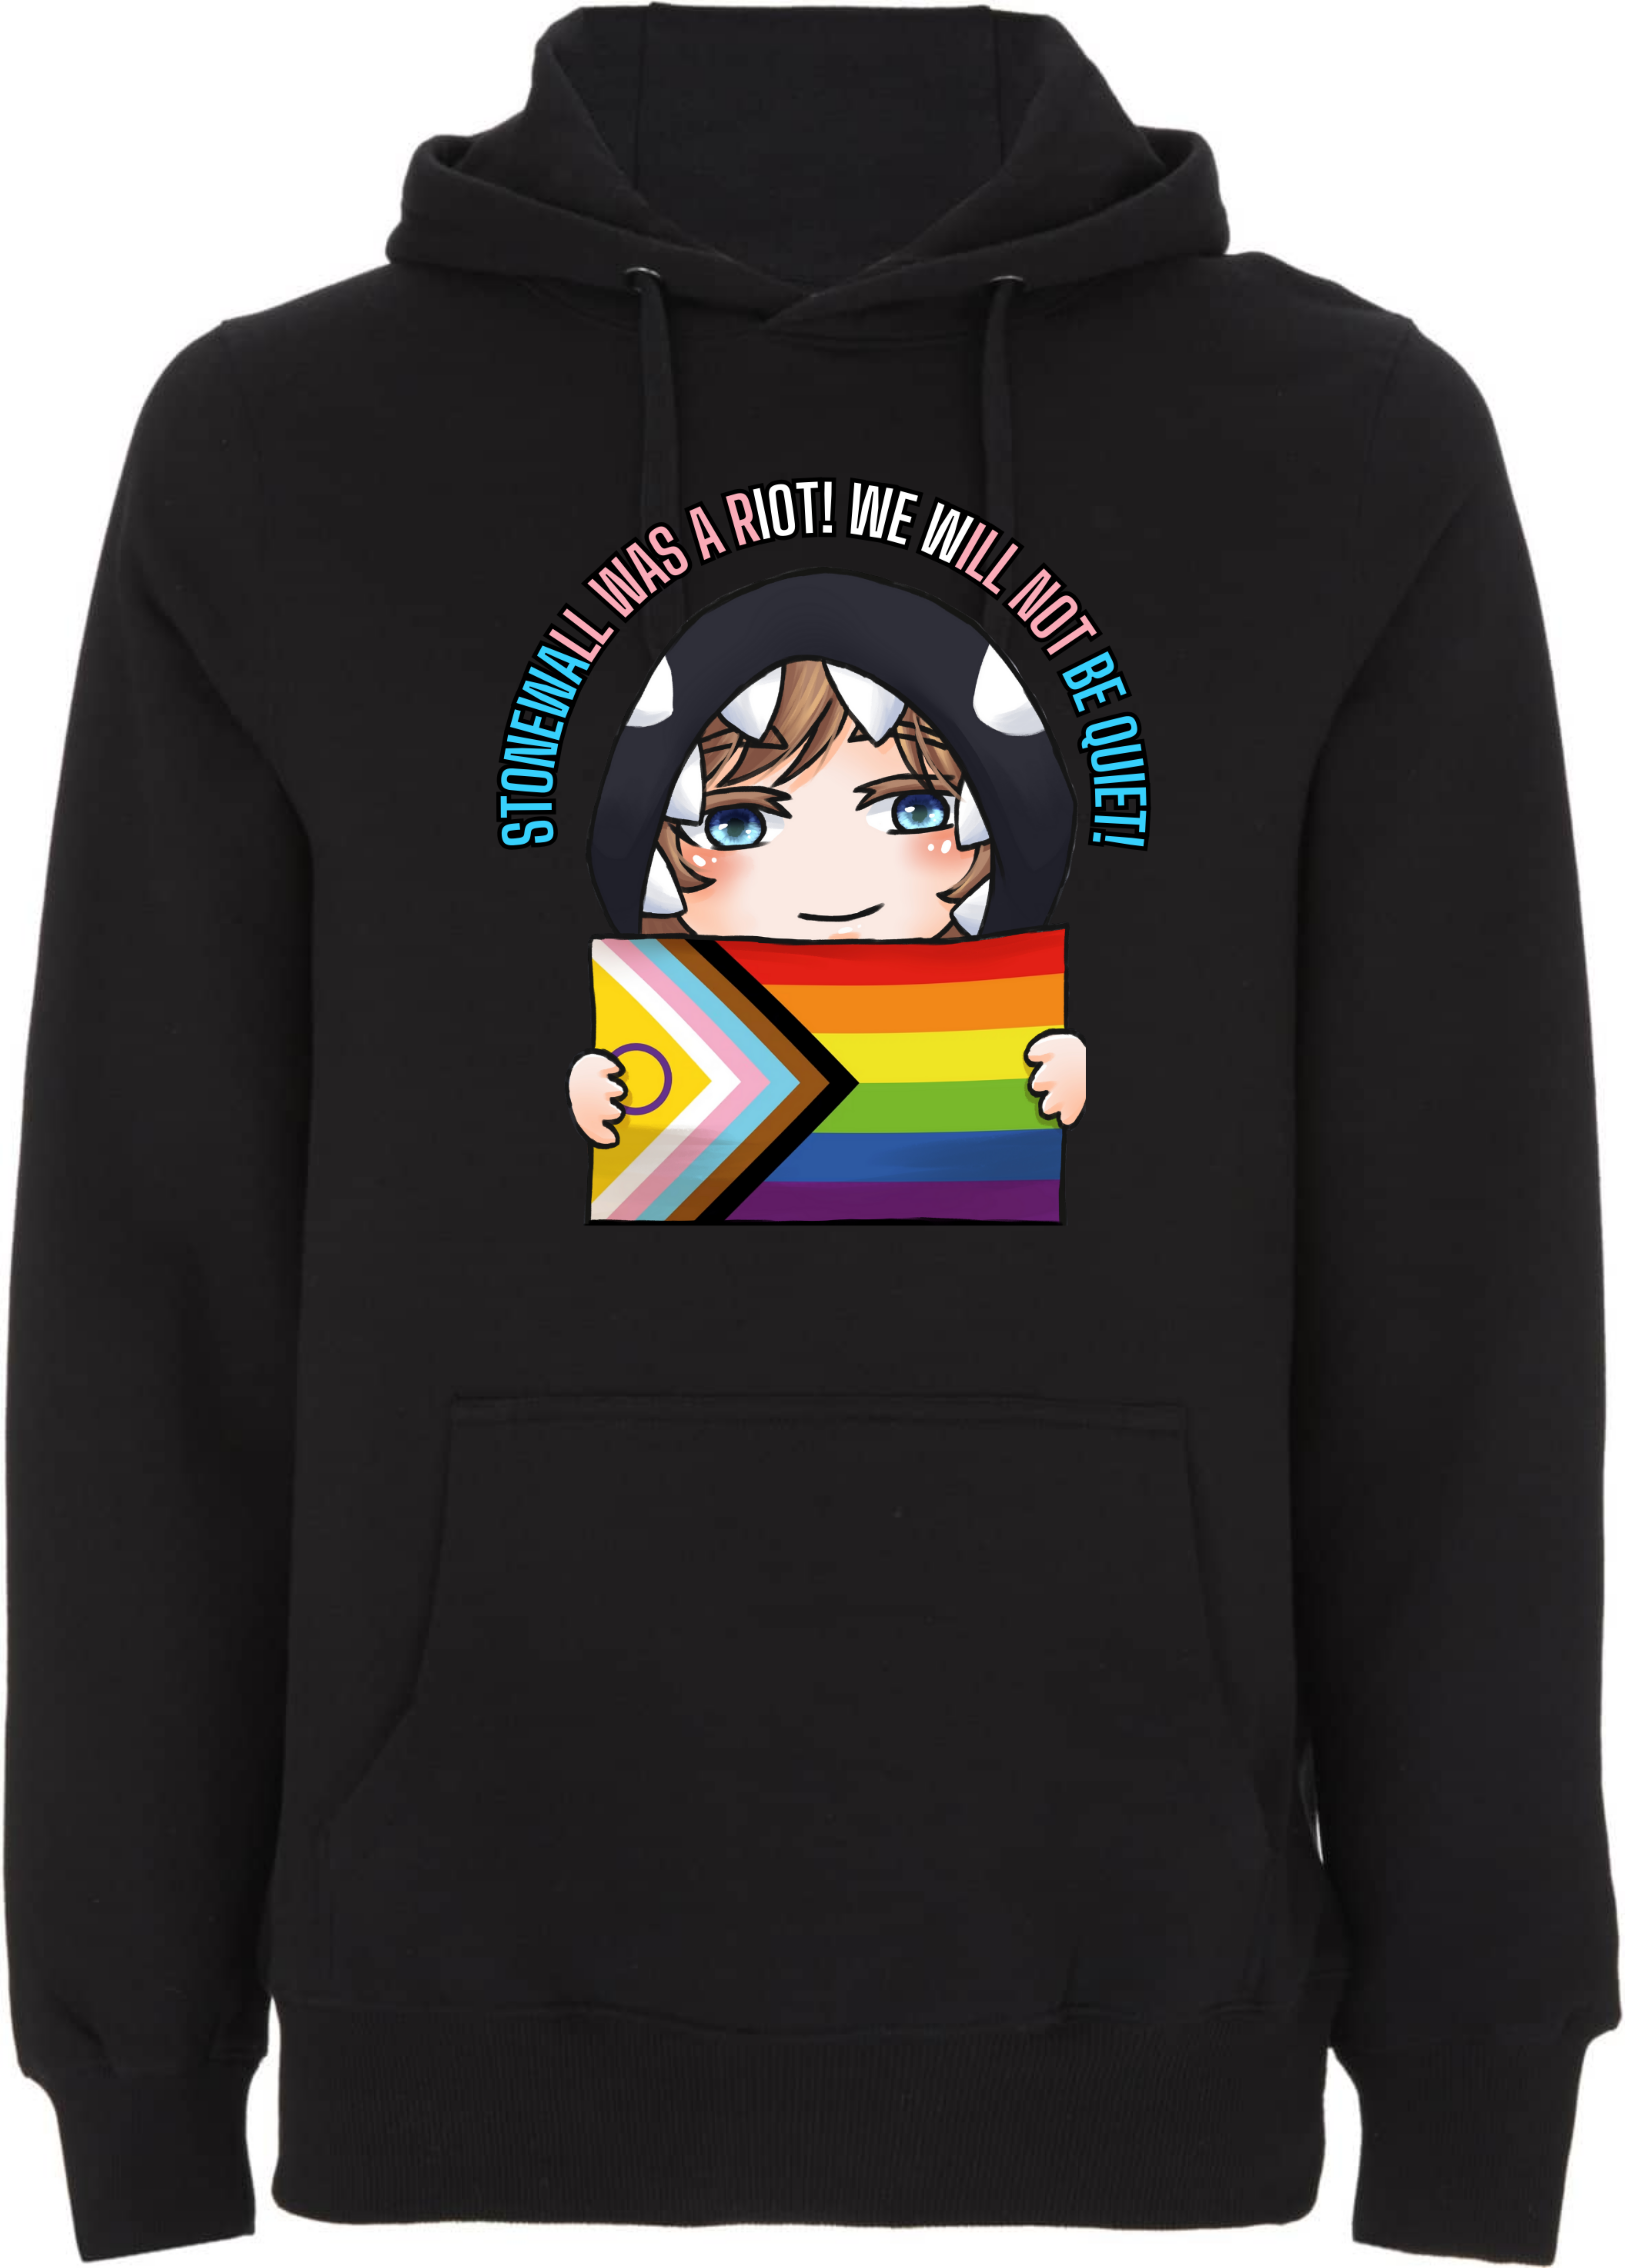 Stonewall Was A Riot! | Unisex Pullover